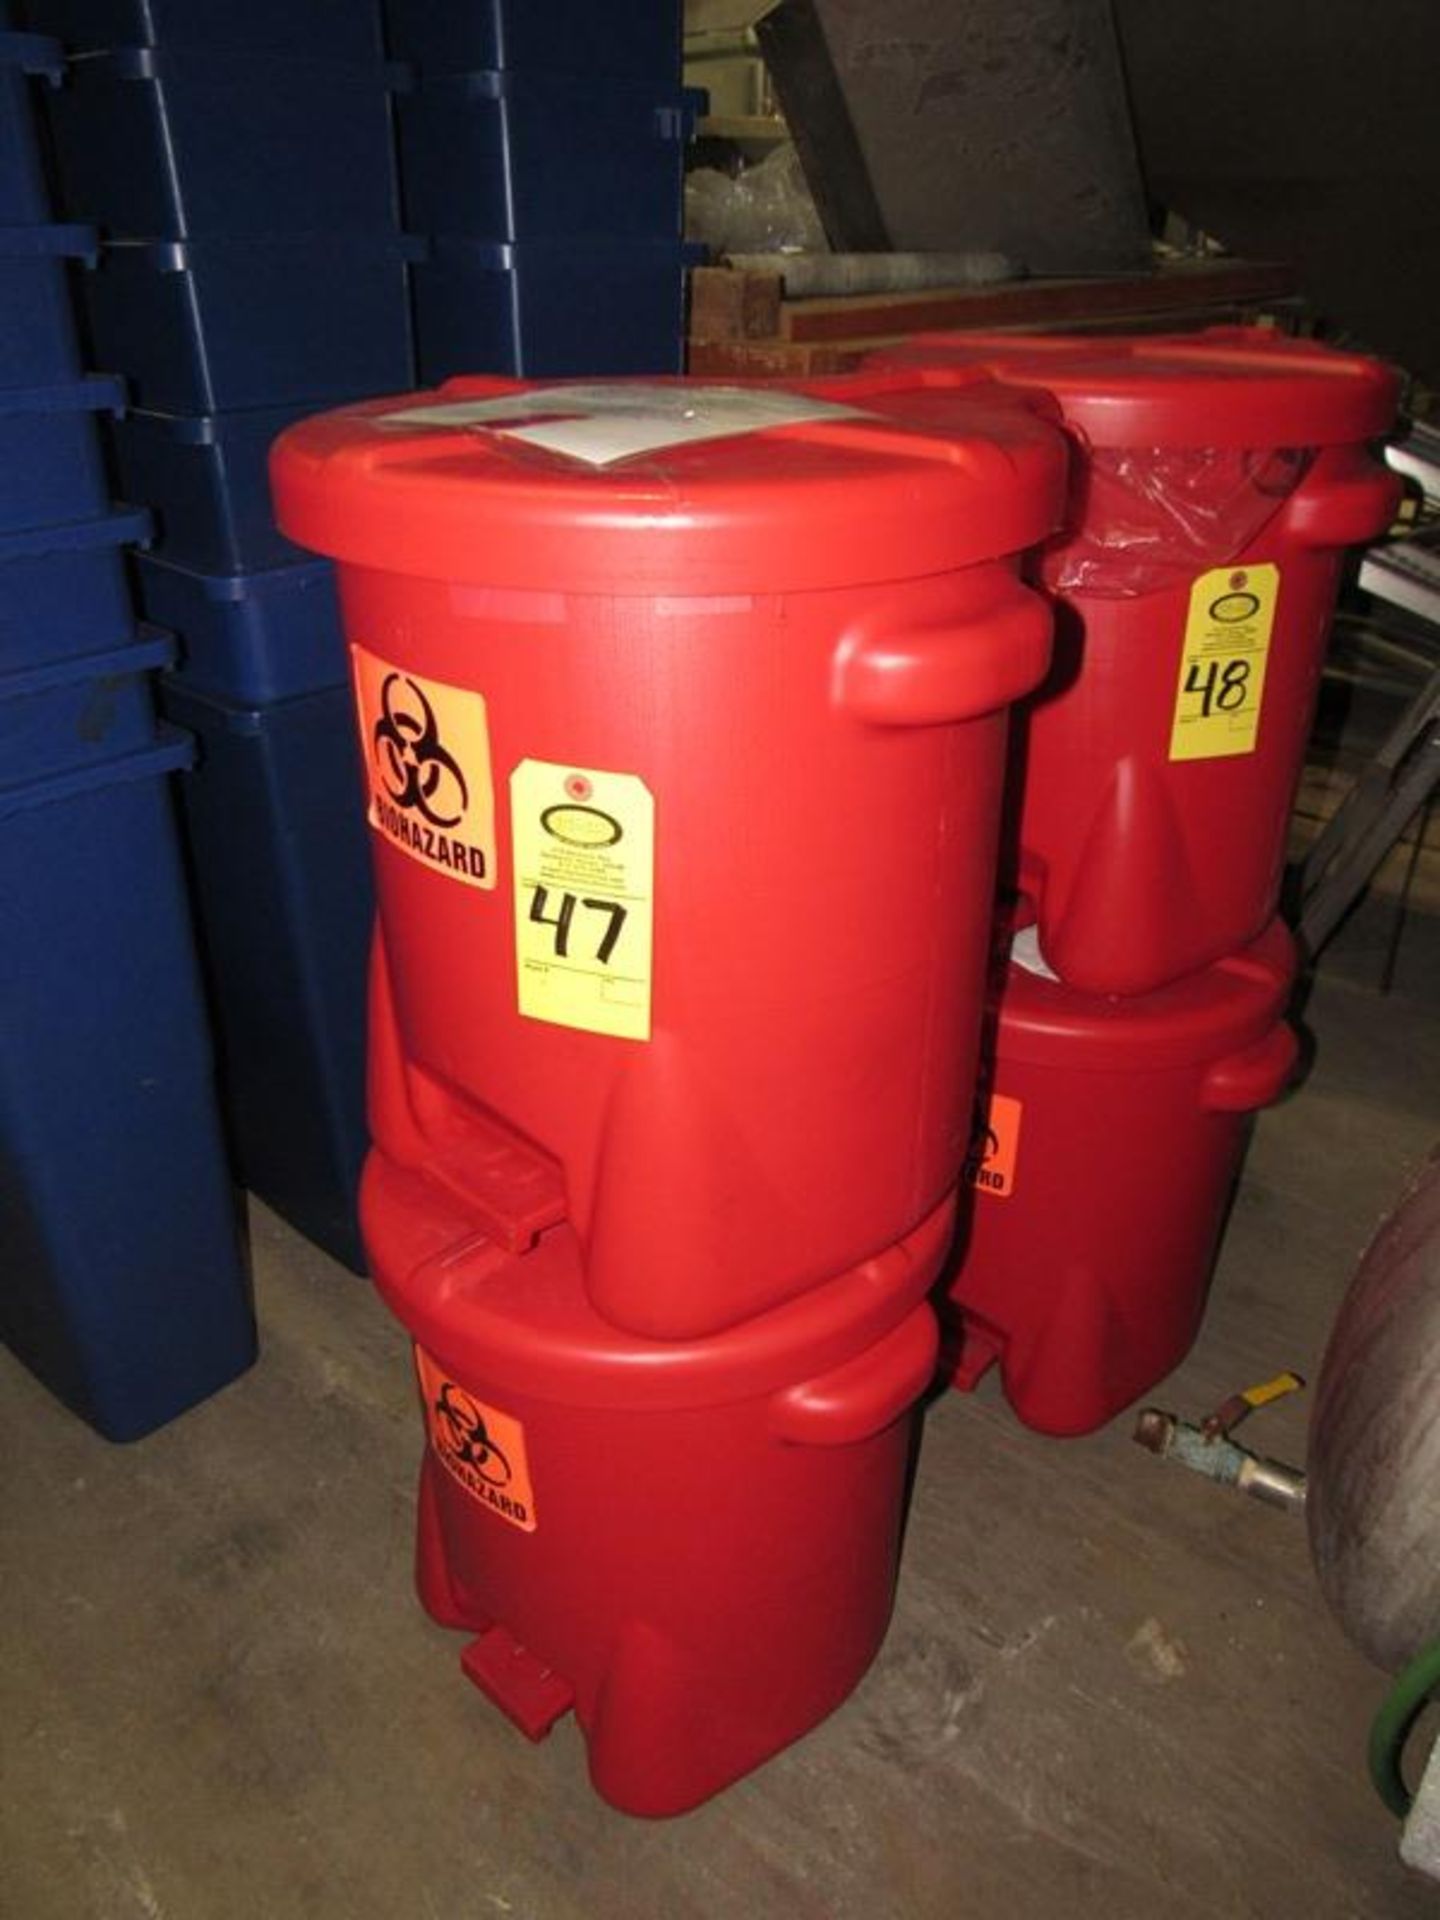 Lot of (2) Plastic Trash Cans Labeled "Bio Hazard", 16" Dia. X 20" D with foot activation (Late